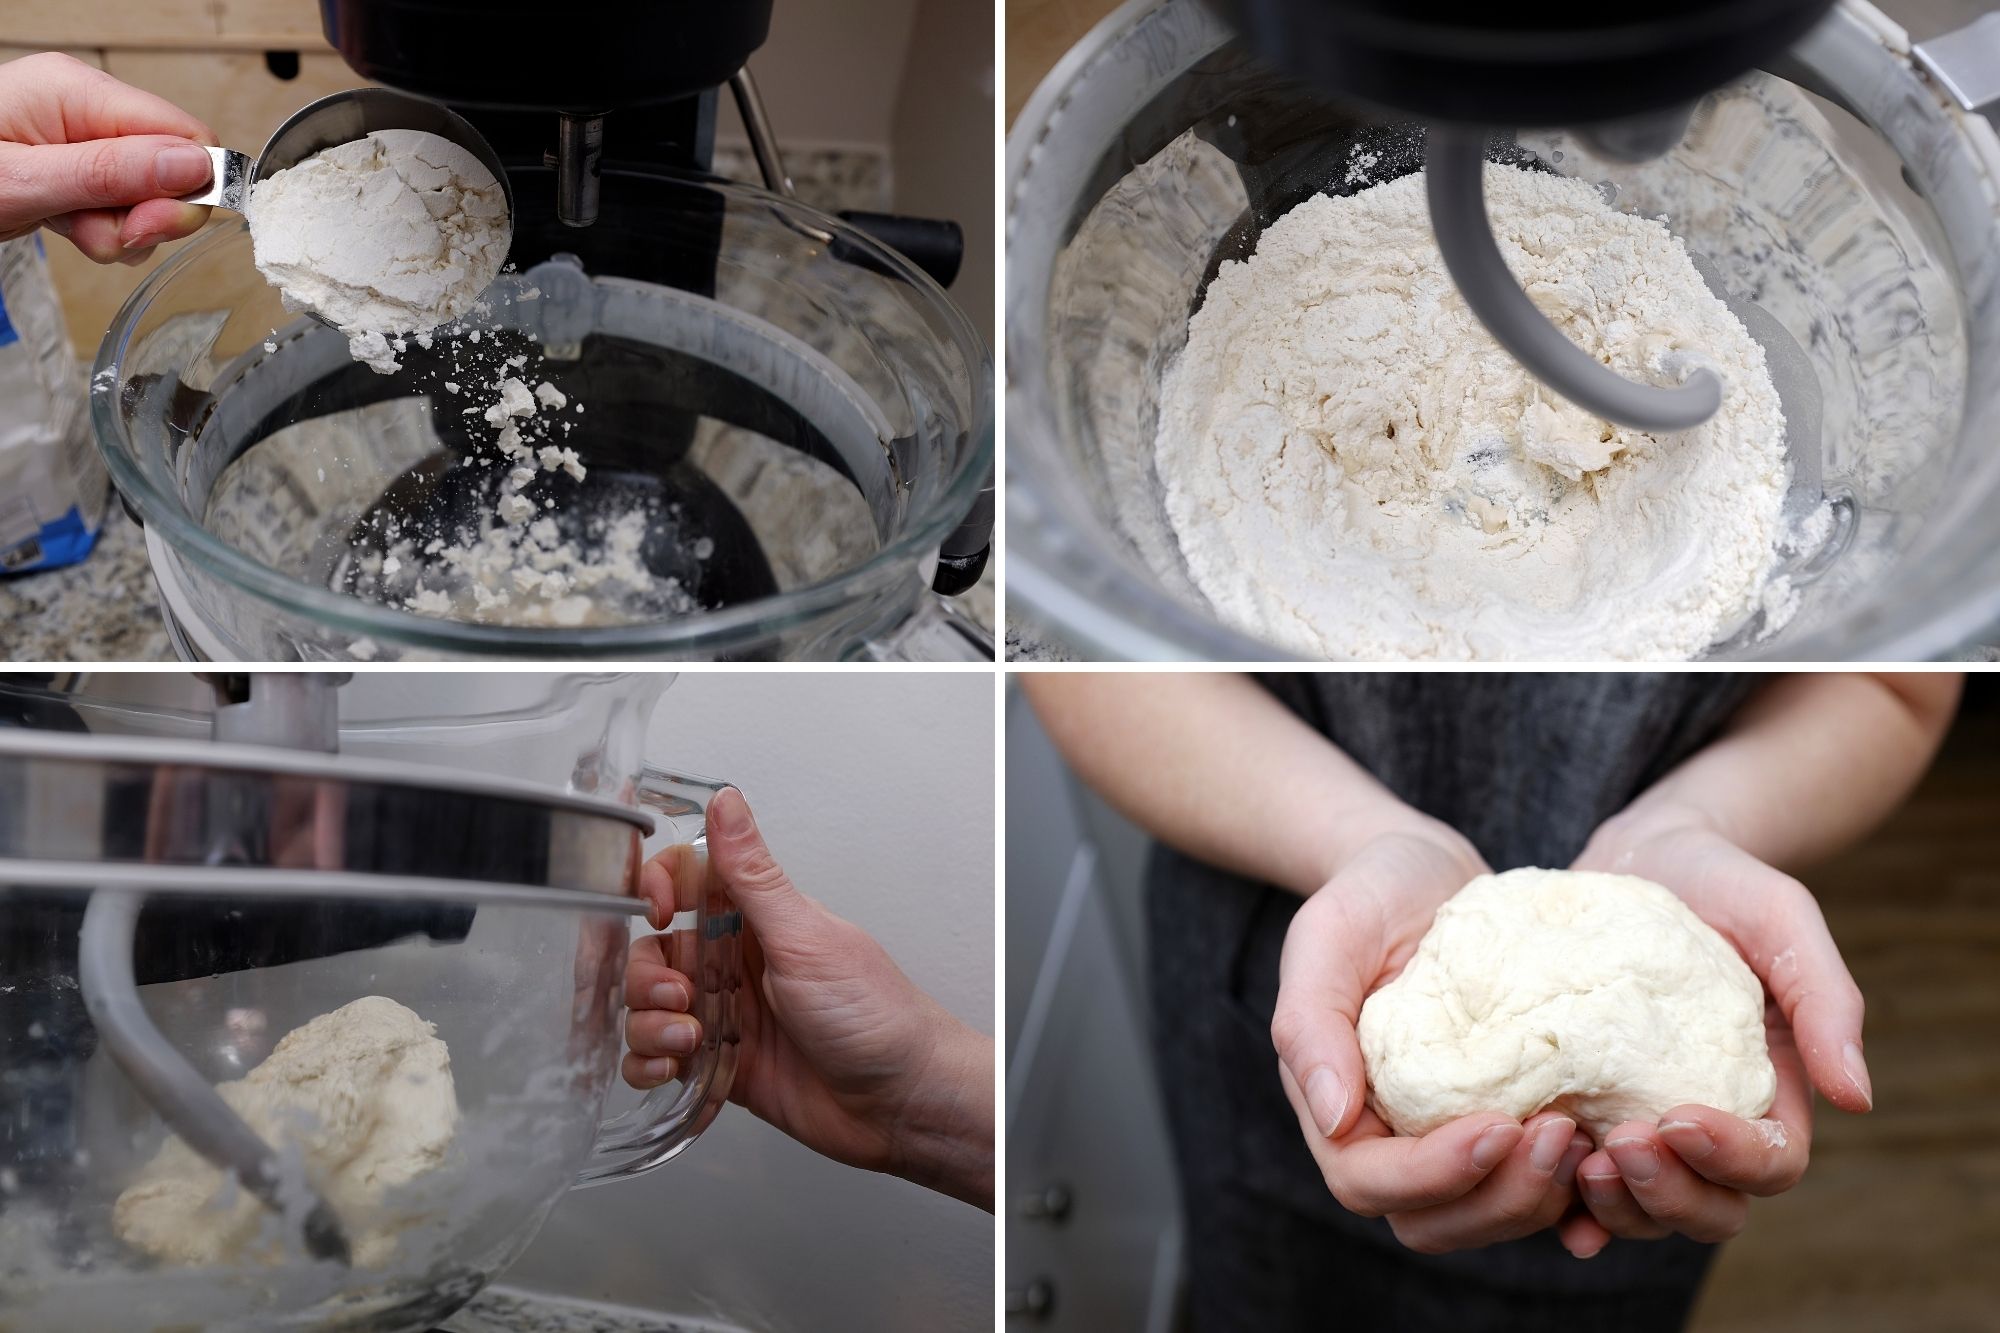 Four shots: adding the flour, starting to knead, checking the dough, and the final dough